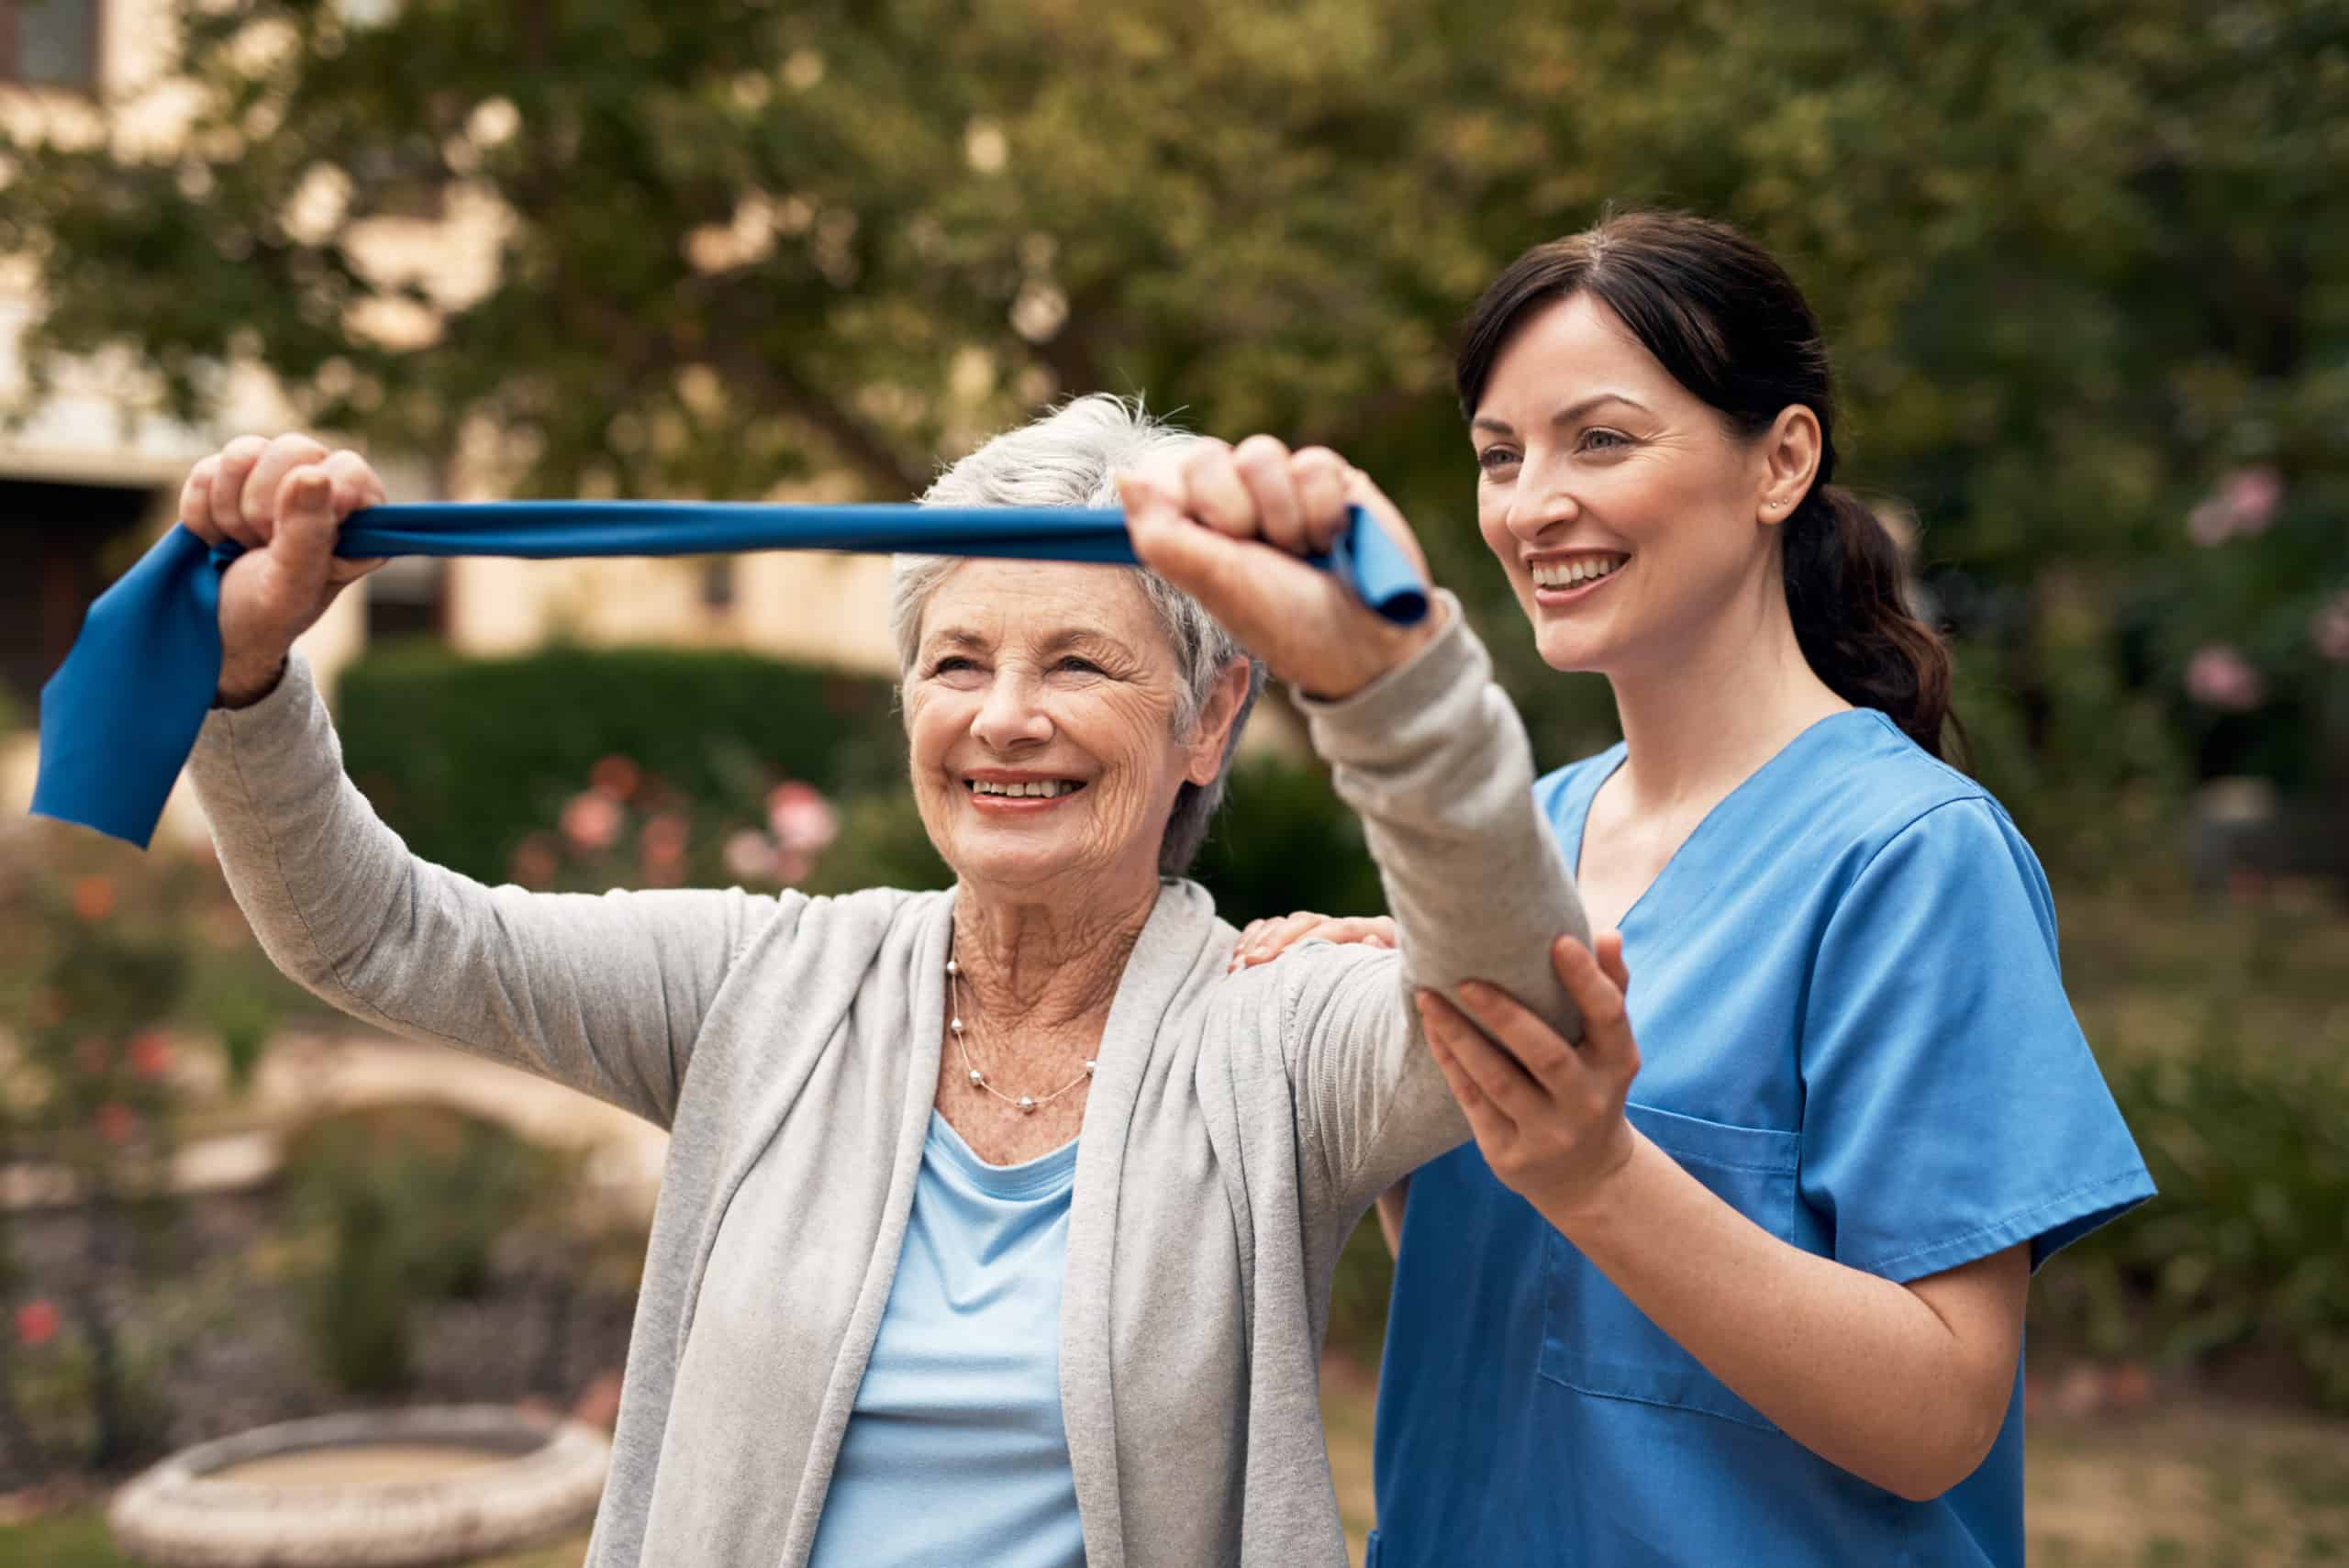 Older woman using resistance bands with the help of a younger female assistant